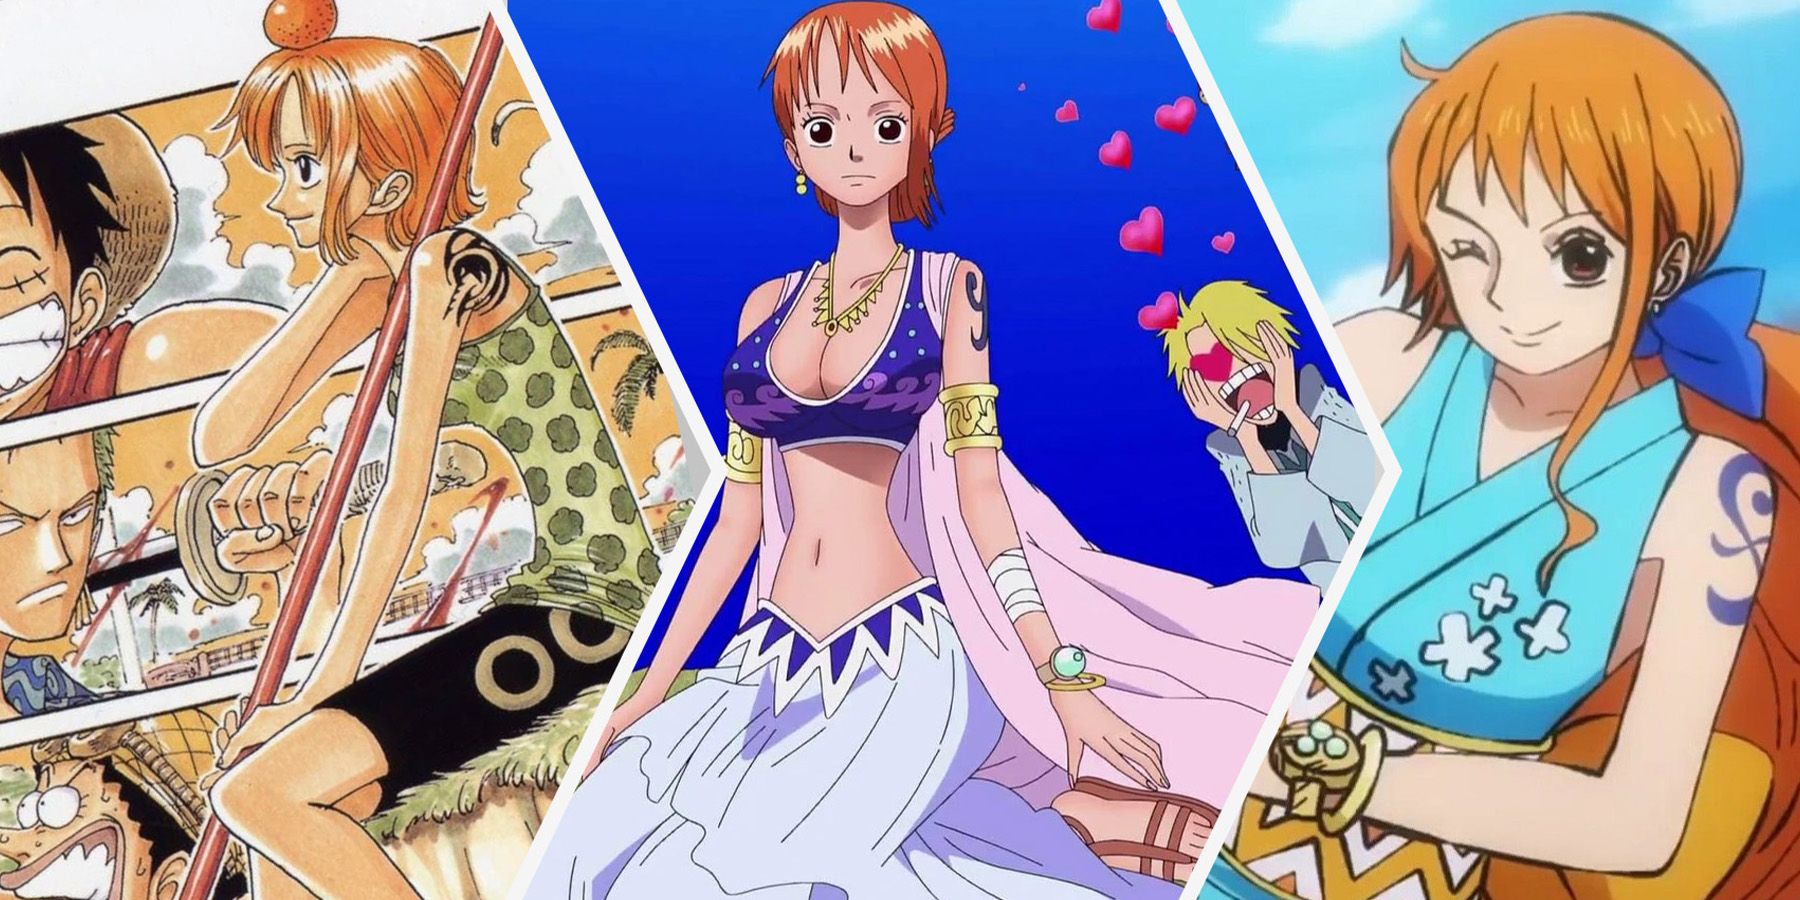 Cool Details You Might Have Missed About Nami's Clothes In One Piece